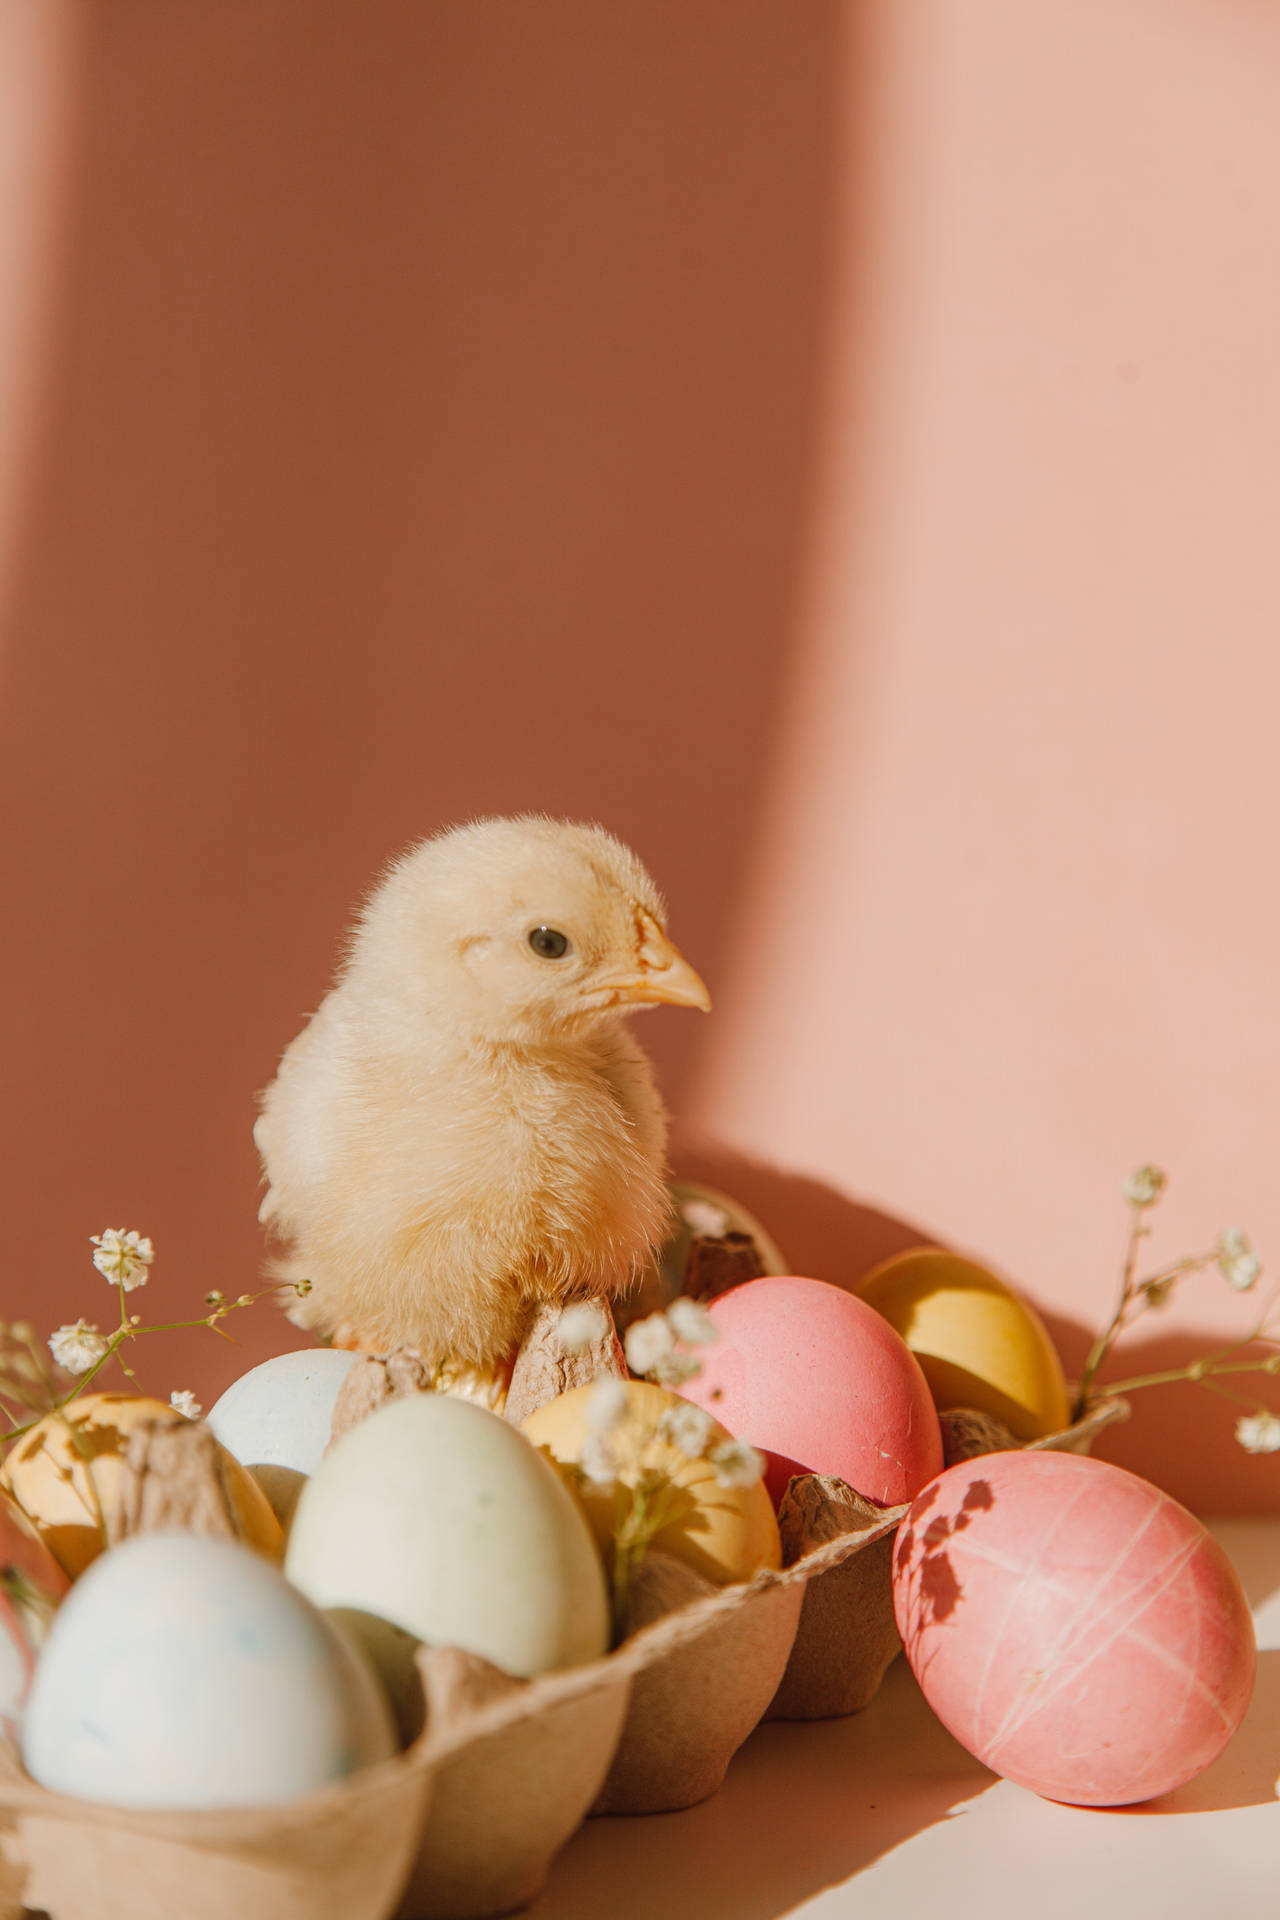 Cute Pastel Aesthetic Colored Eggs And Chick Background